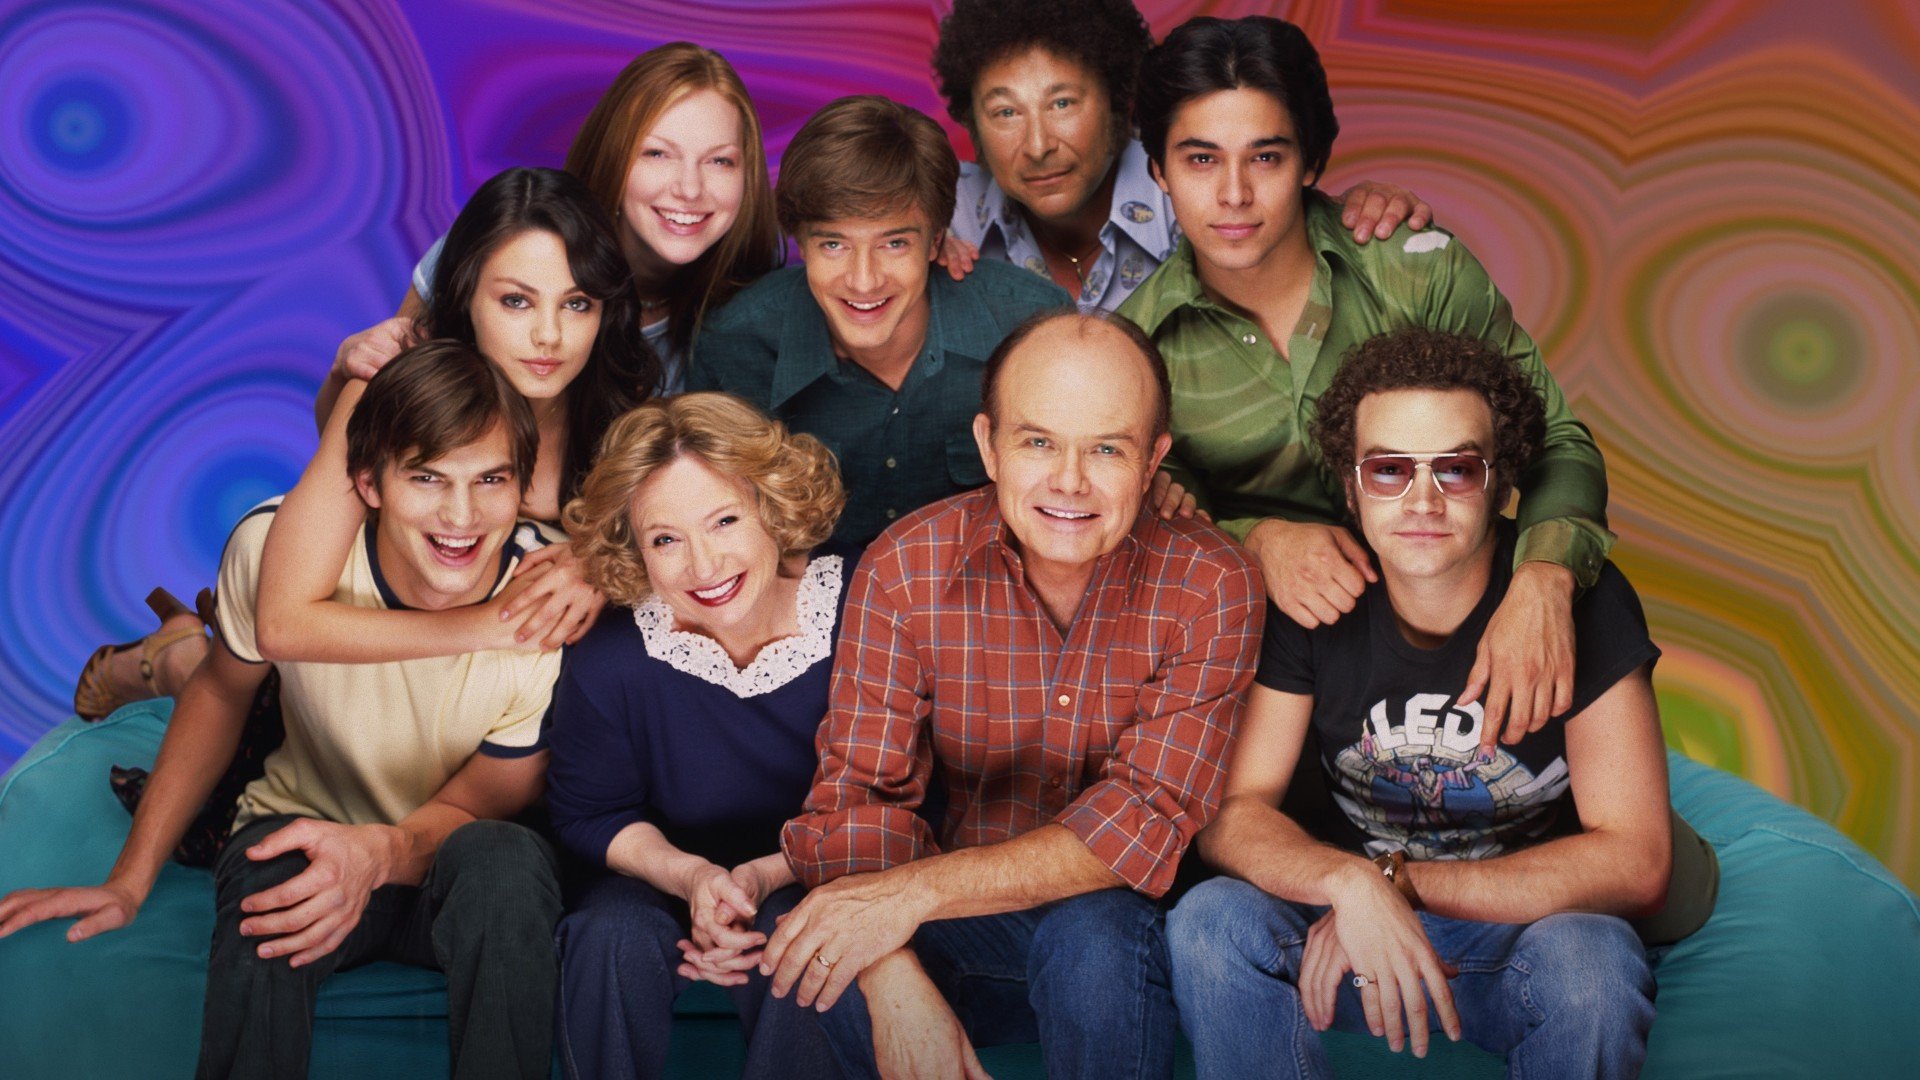 That '70s Show #2